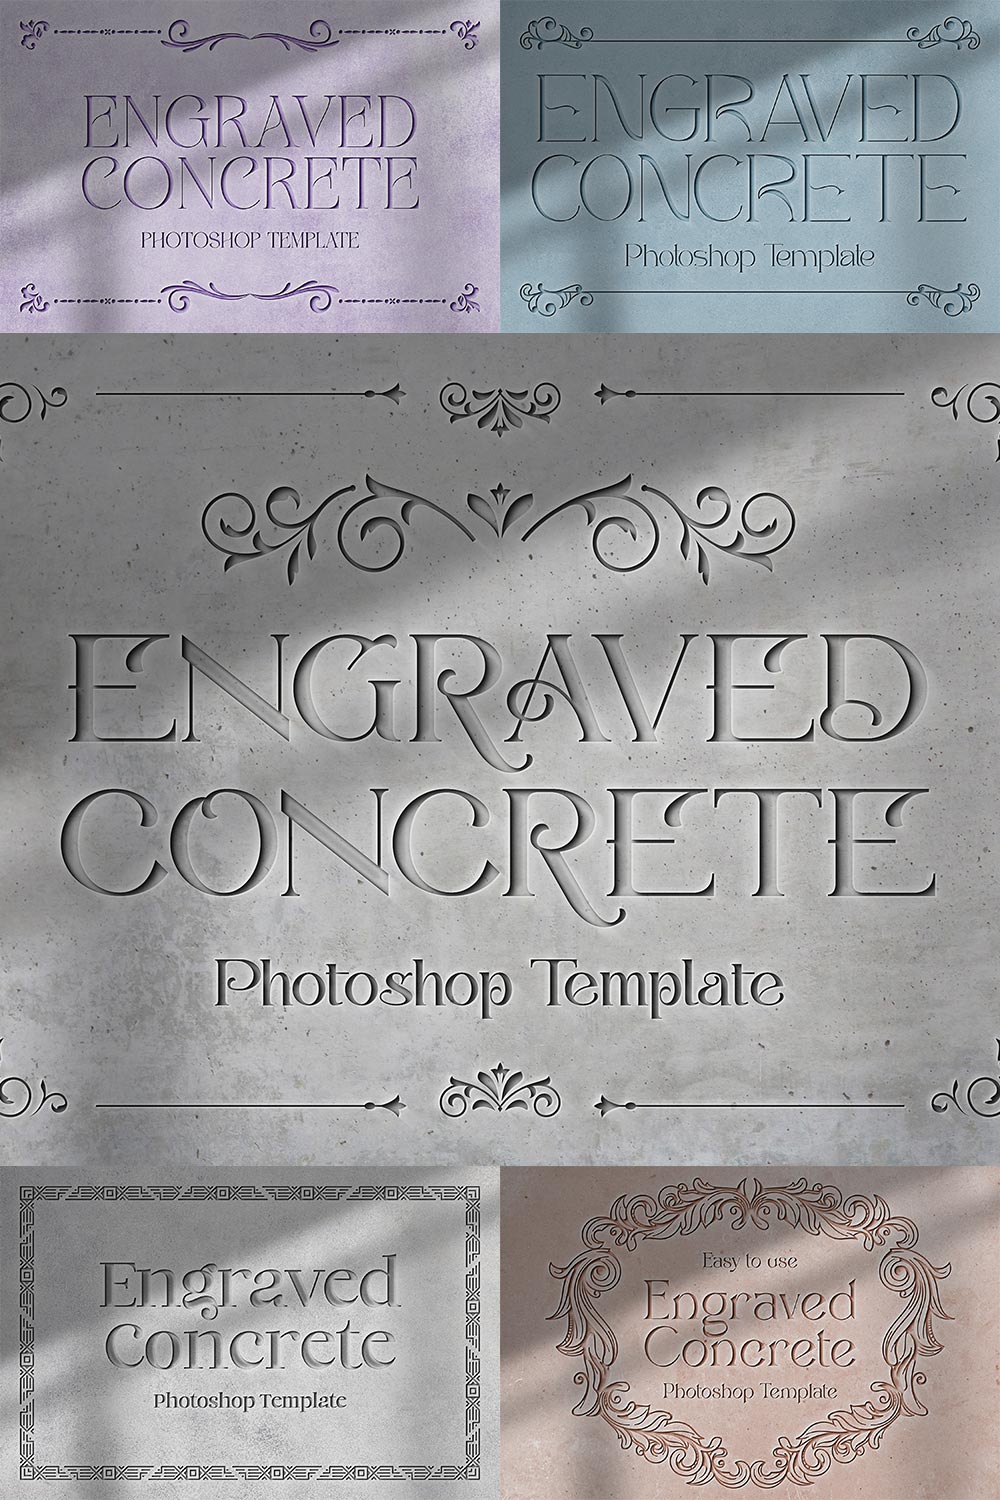 Engraved Concrete Template pinterest preview image.